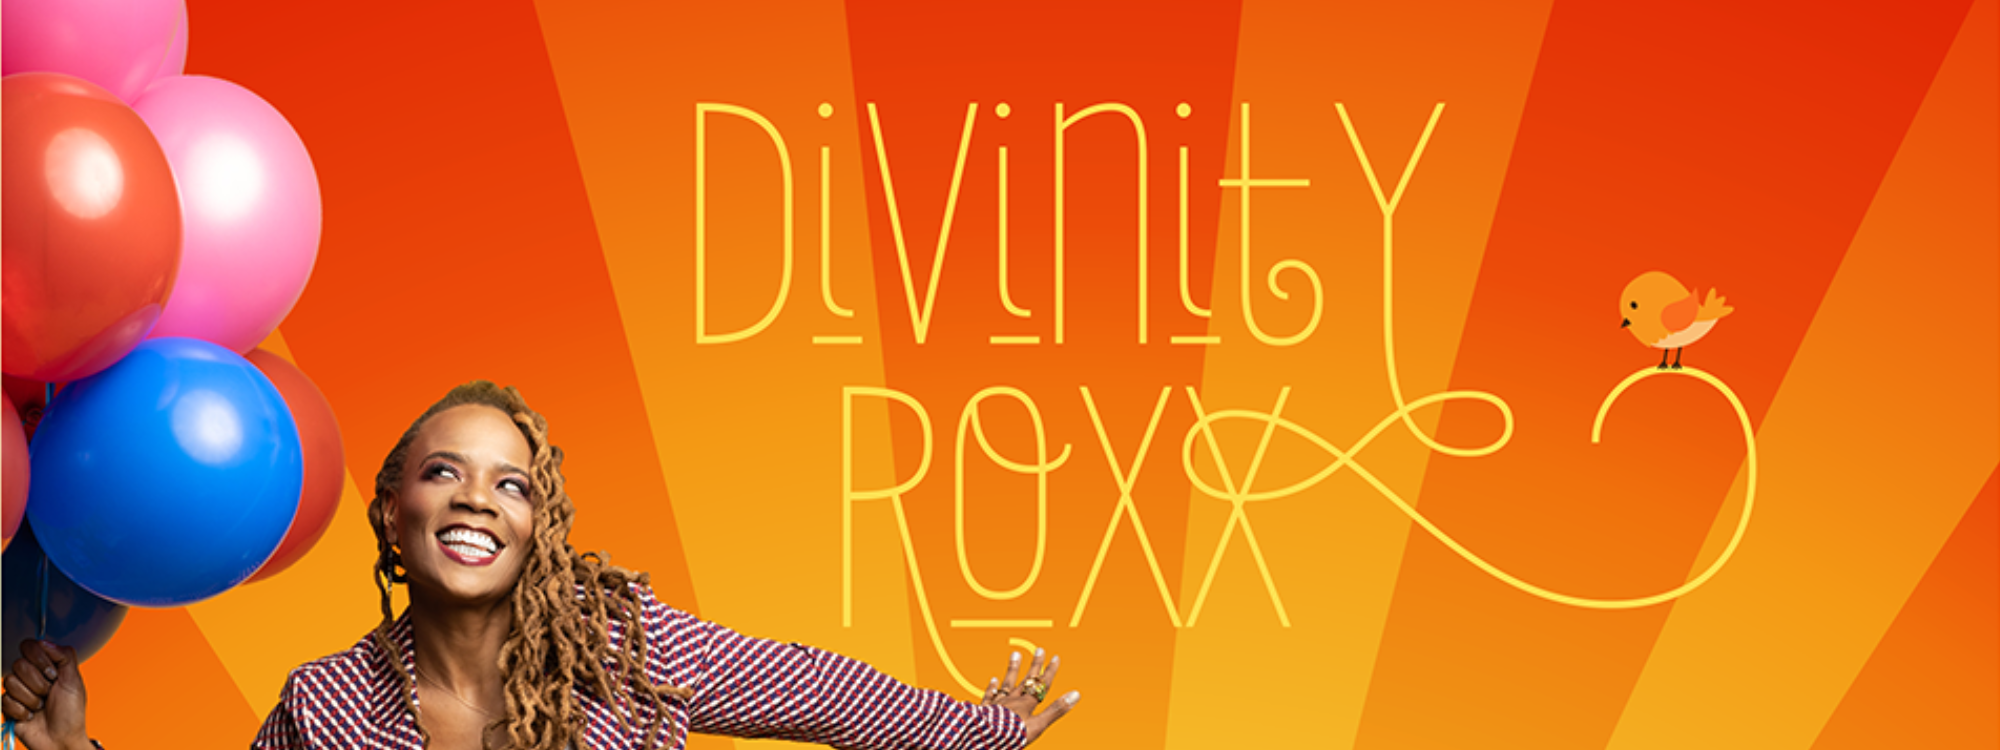 Meet The Musician: Interview with Divinity Roxx